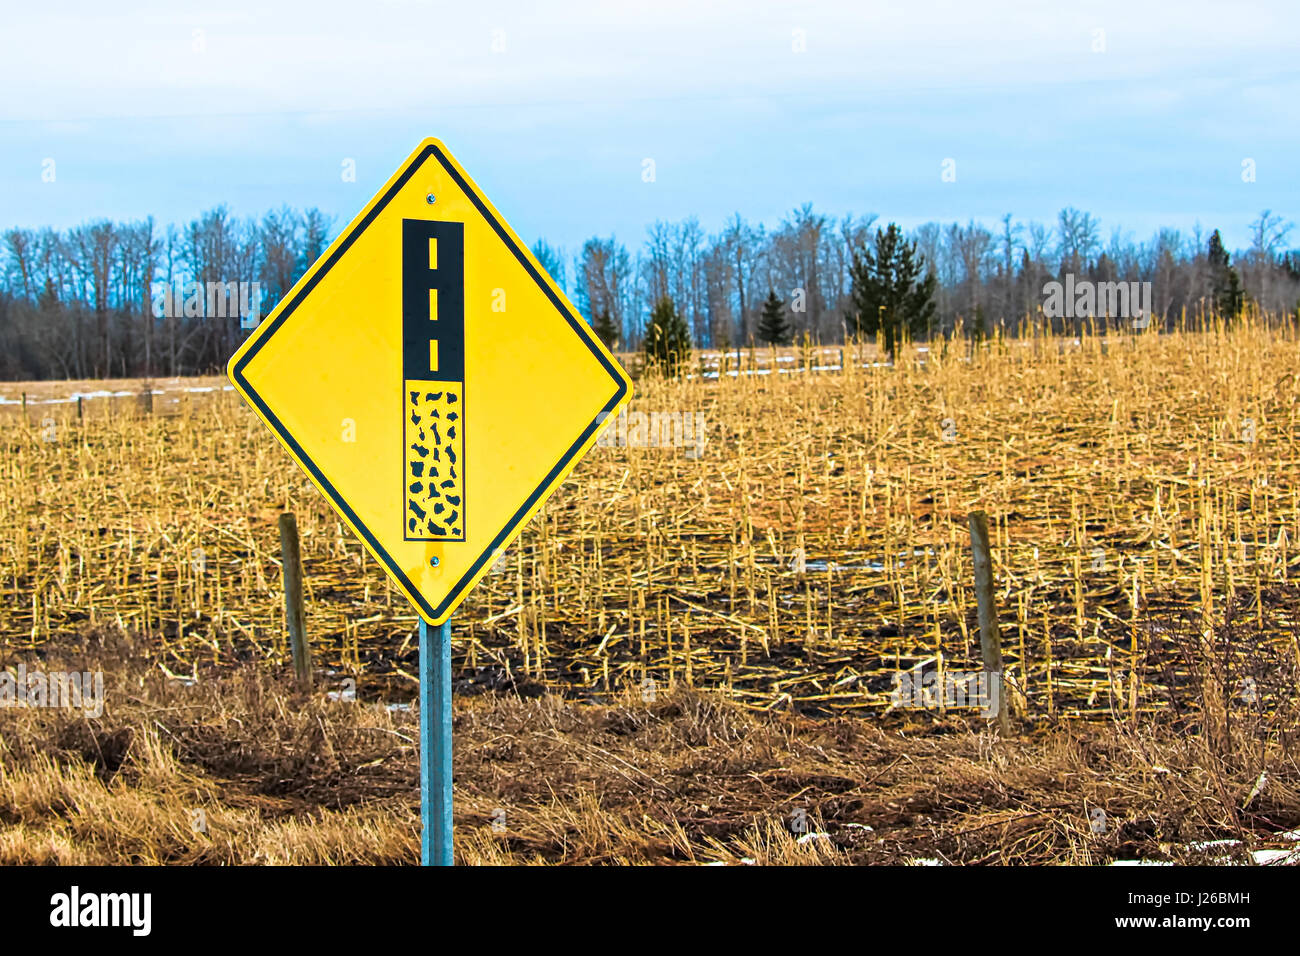 End of gravel road ahead warning sign. Stock Photo